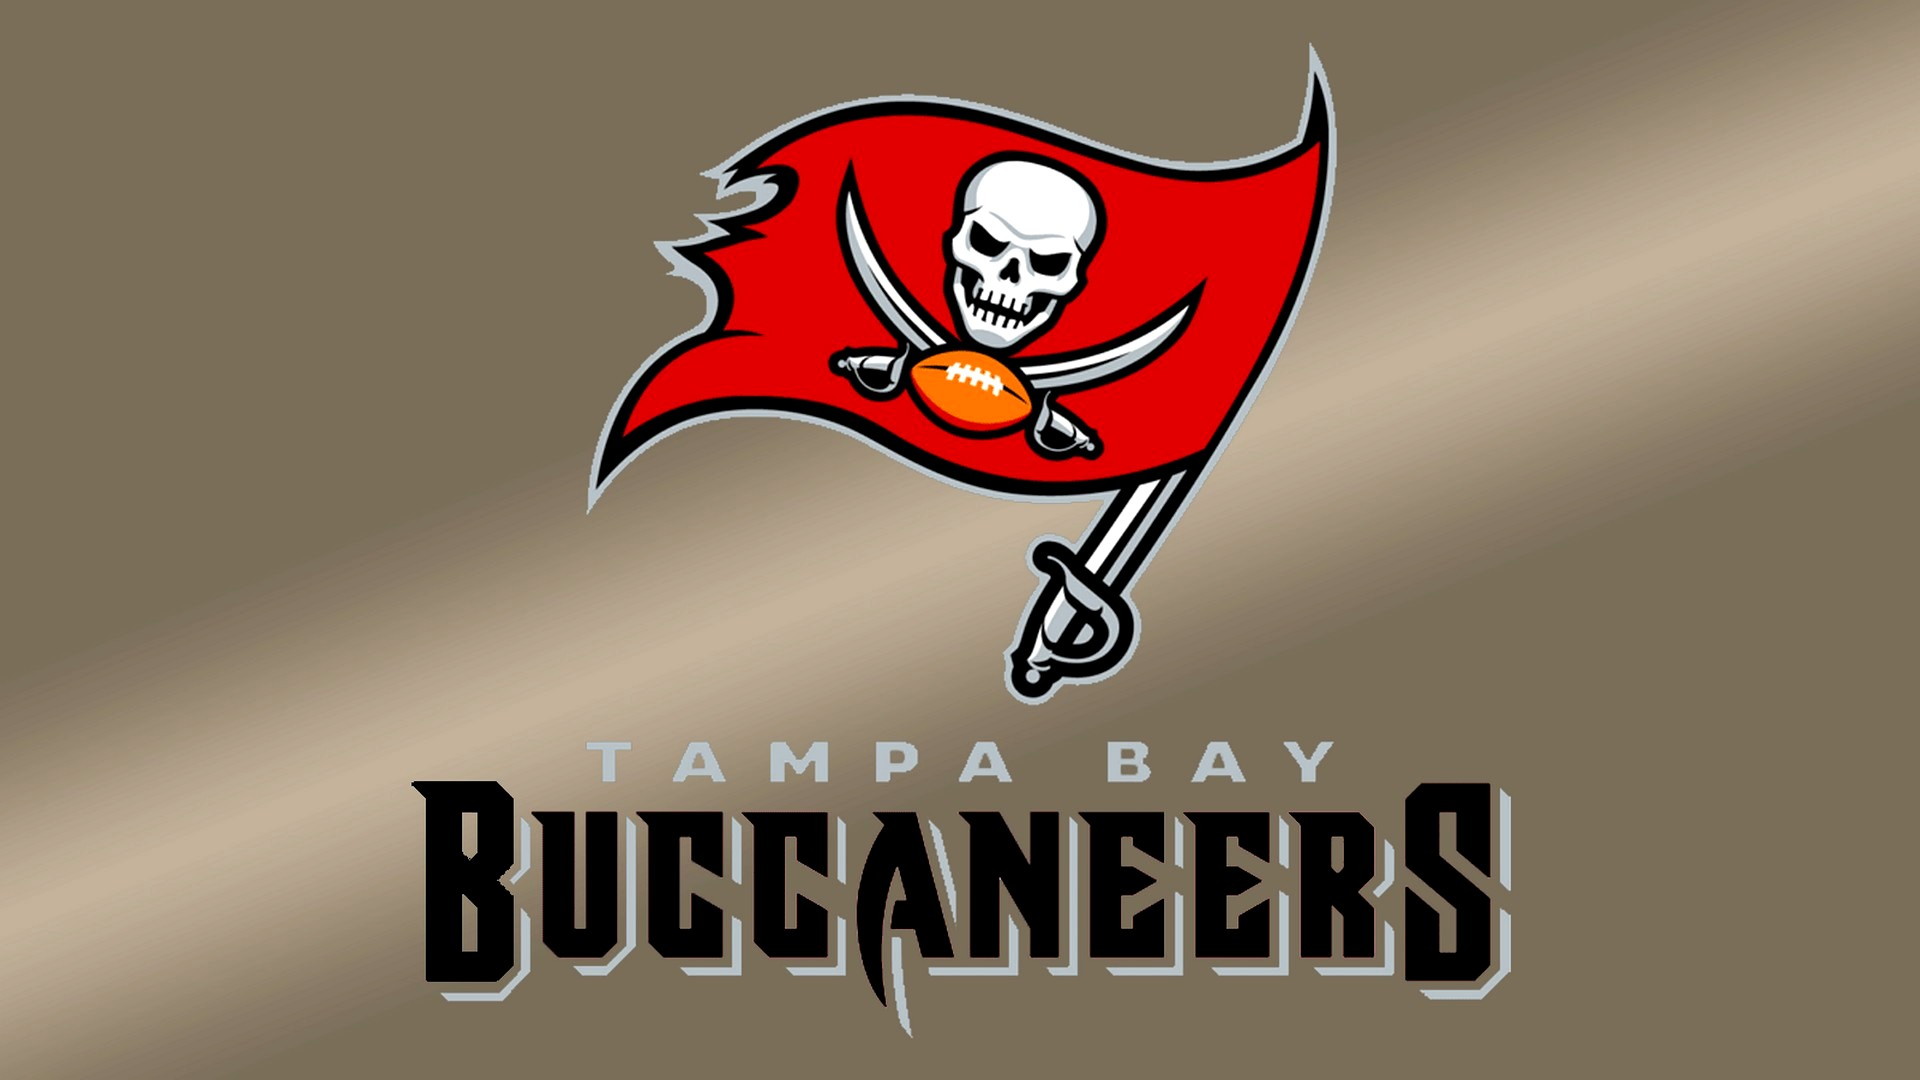 Tampa Bay Buccaneers Wallpaper HD with high-resolution 1920x1080 pixel. You can use and set as wallpaper for Notebook Screensavers, Mac Wallpapers, Mobile Home Screen, iPhone or Android Phones Lock Screen